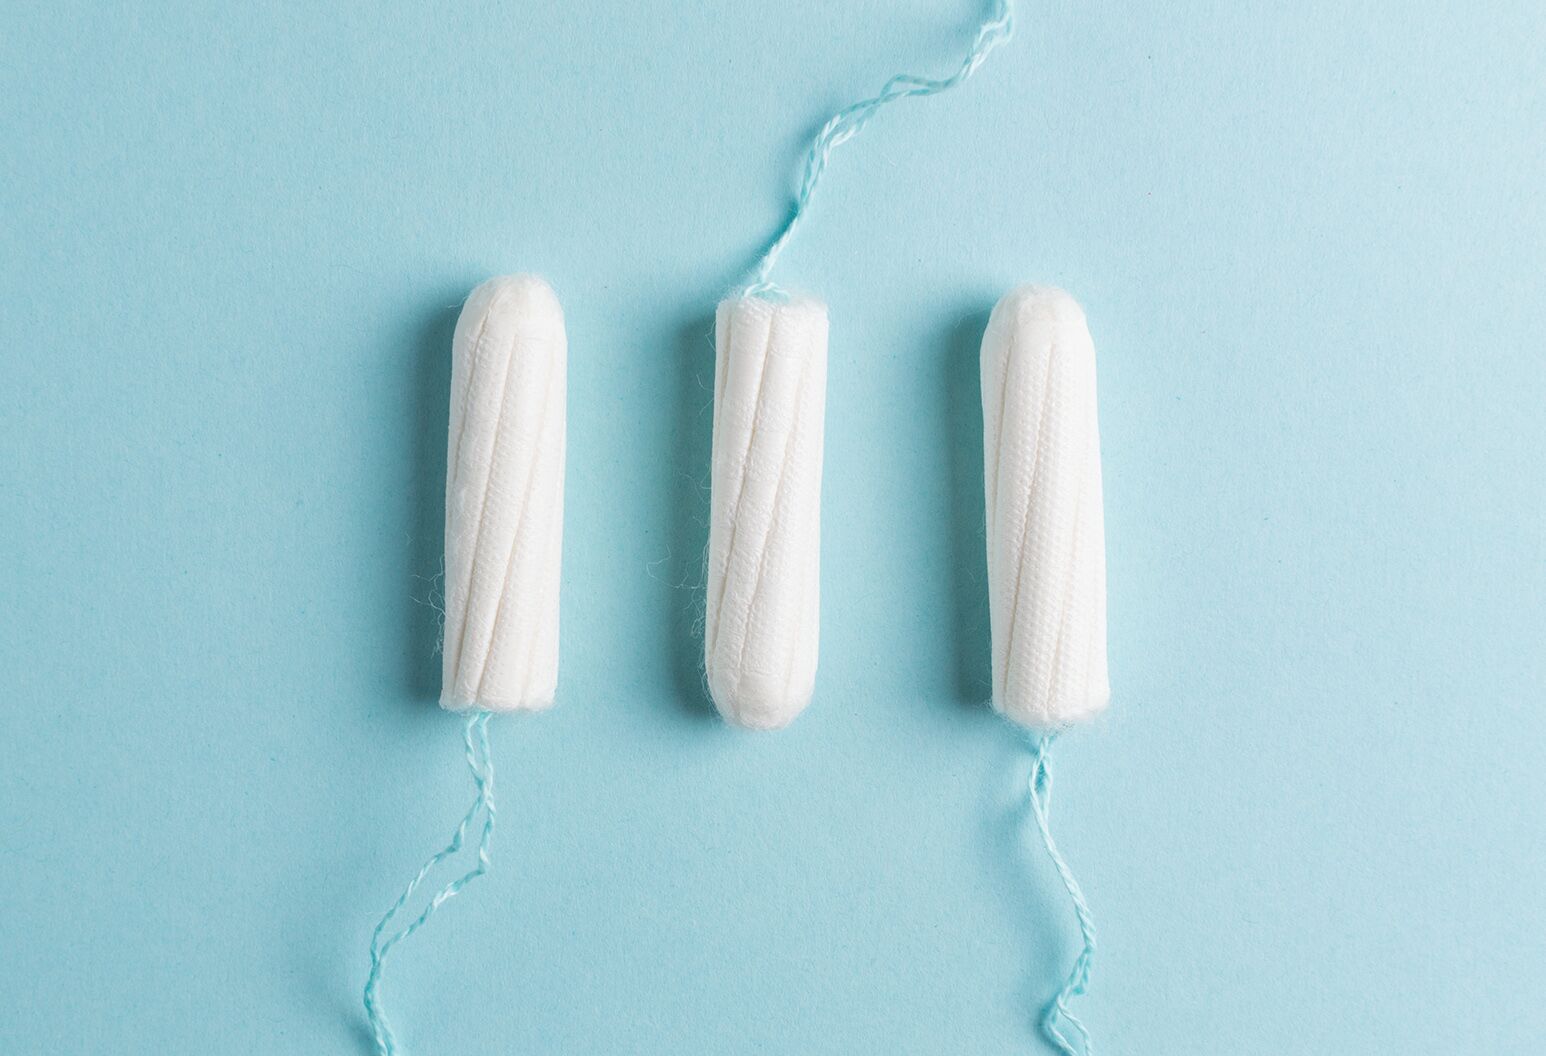 FYI: tampons have an expiry date